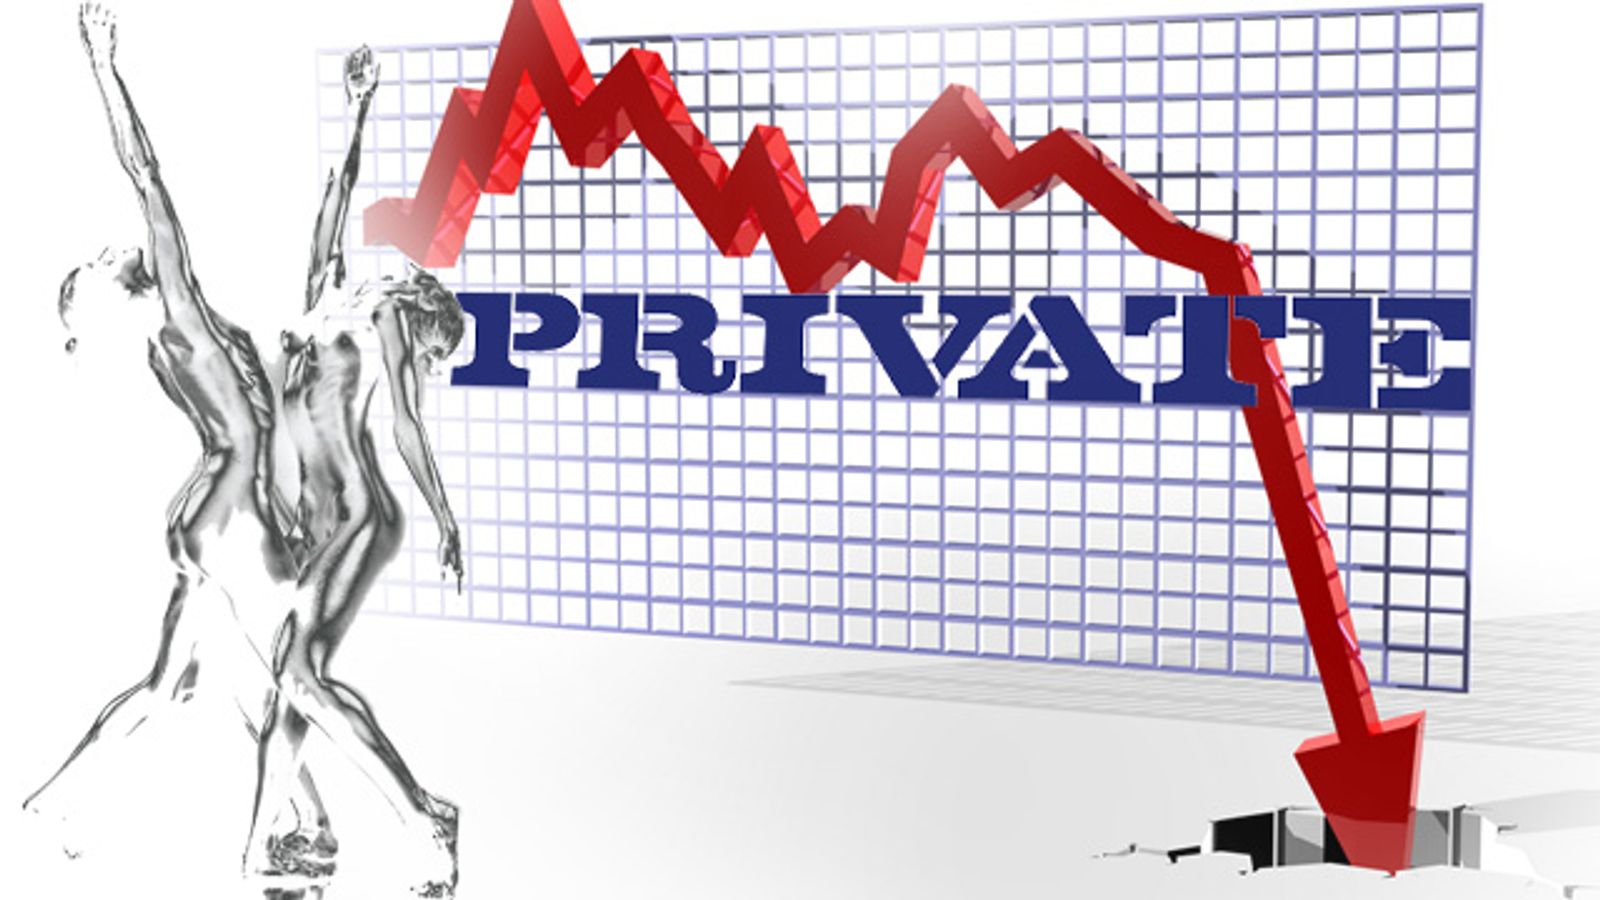 Nasdaq: Private Will be Delisted if Stock Price Doesn't Improve